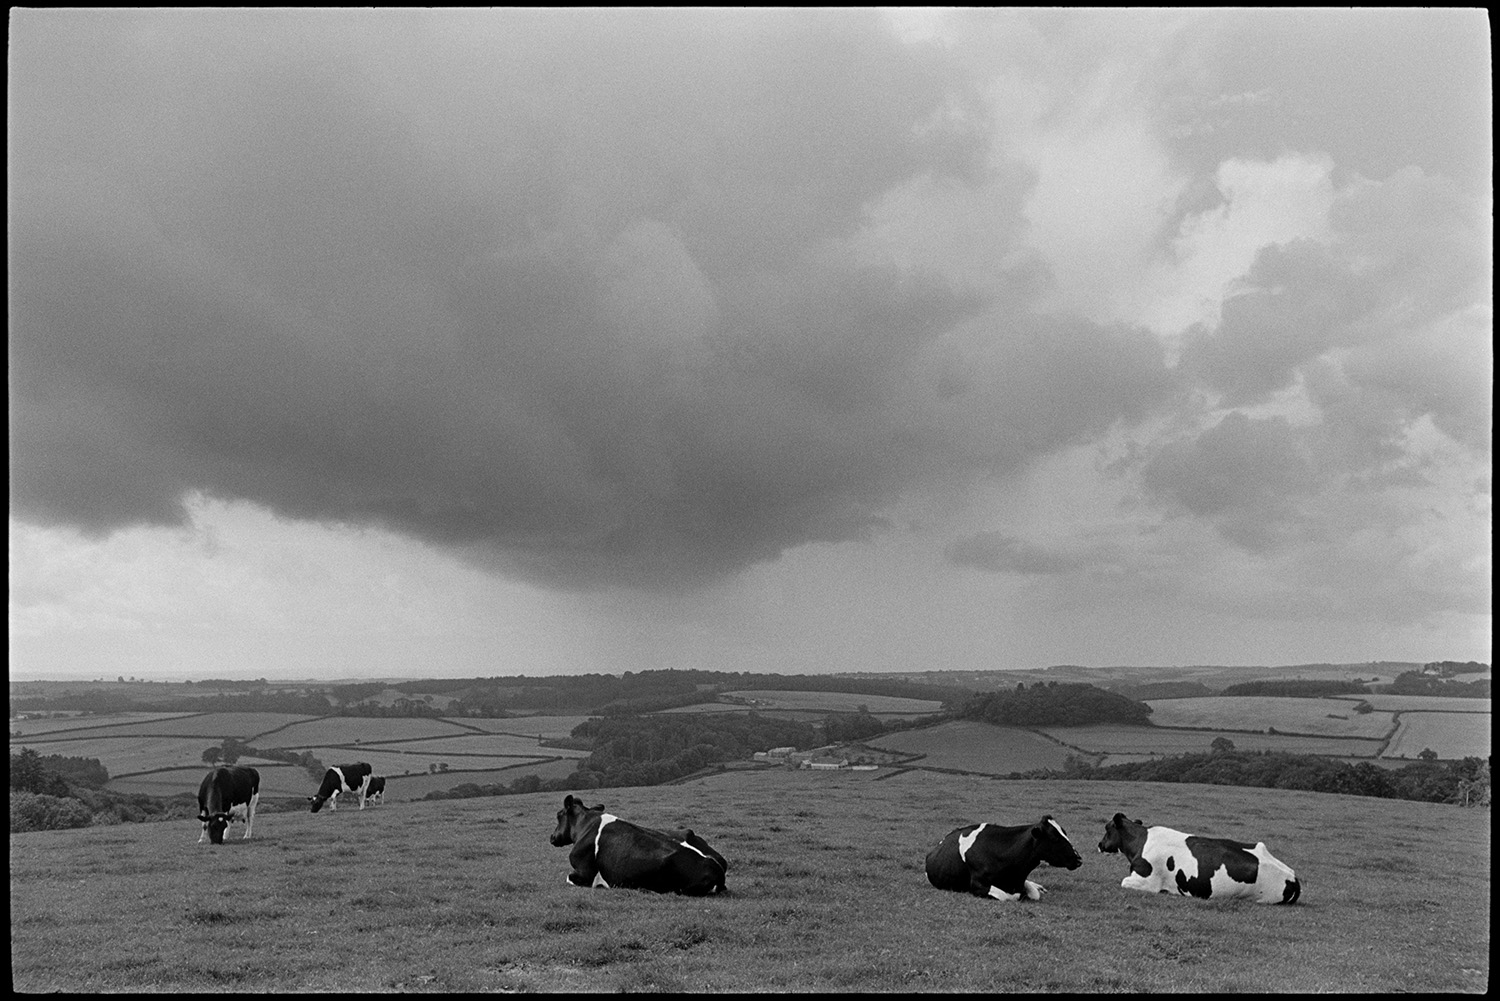 Cows sitting in field with gathering storm clouds. 
[Cows sitting and grazing in a field at Harepath, Beaford. A landscape of fields, hedgerows and gathering storm clouds can be seen in the background.]